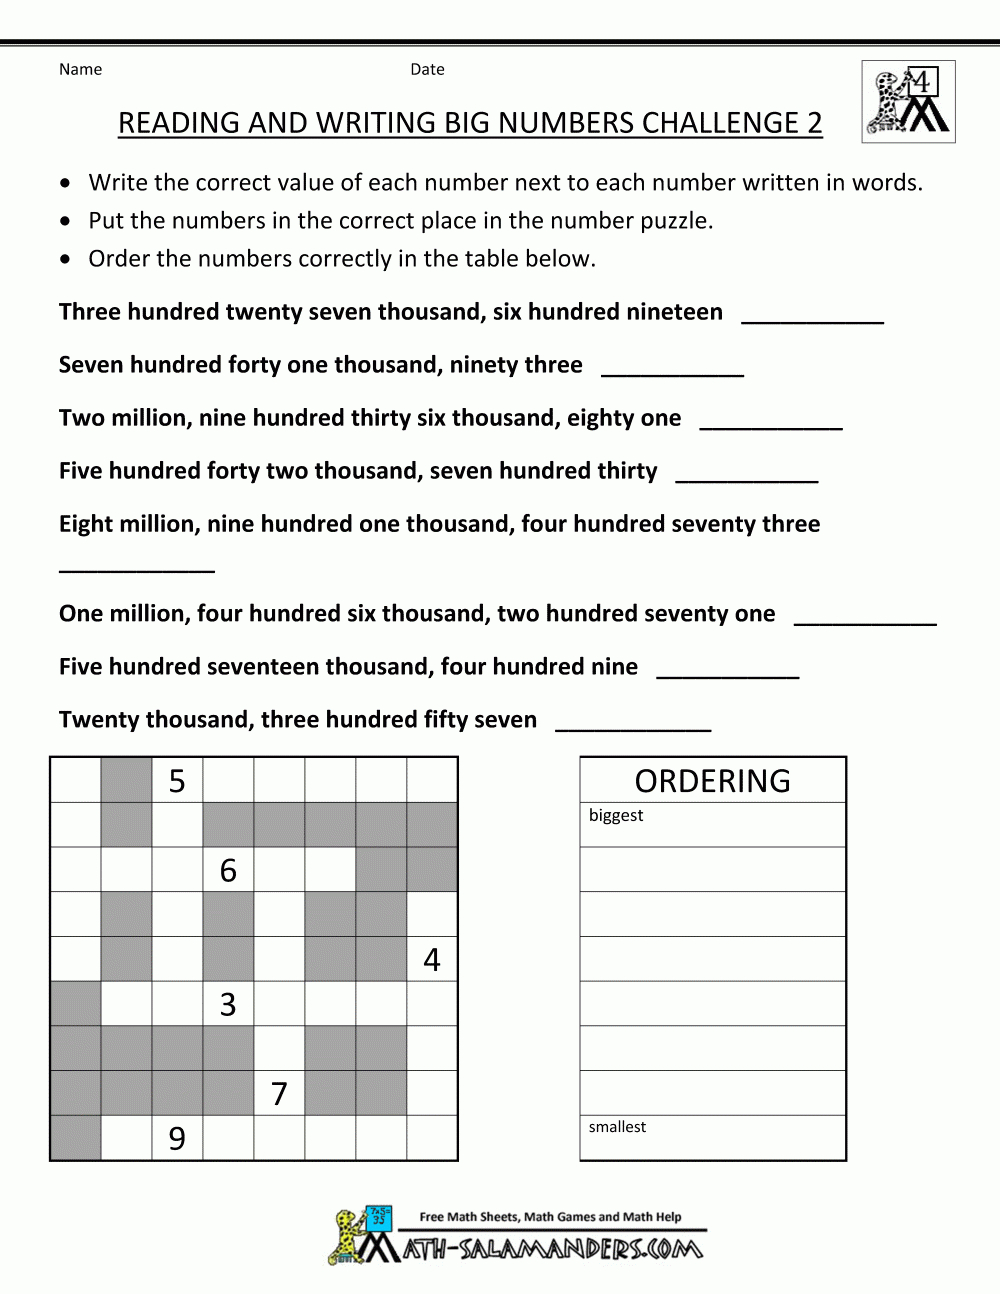 4Th Grade Math Worksheets Reading Writing Big Numbers 2 | M A T H (4 - Free Printable Fun Math Worksheets For 4Th Grade